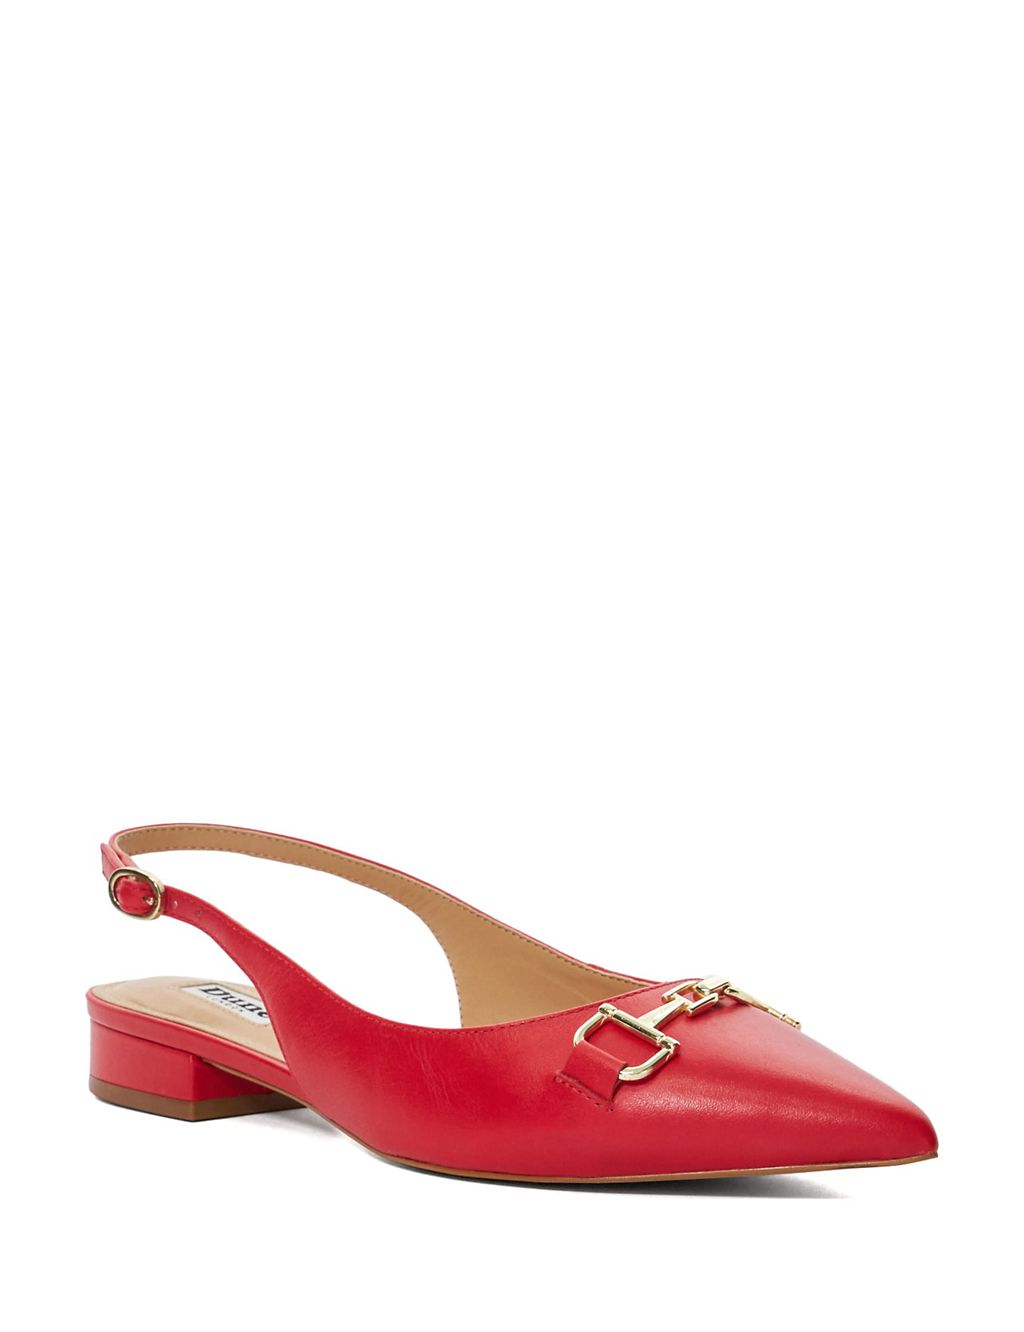 Leather Buckle Flat Pointed Ballet Pumps 1 of 5